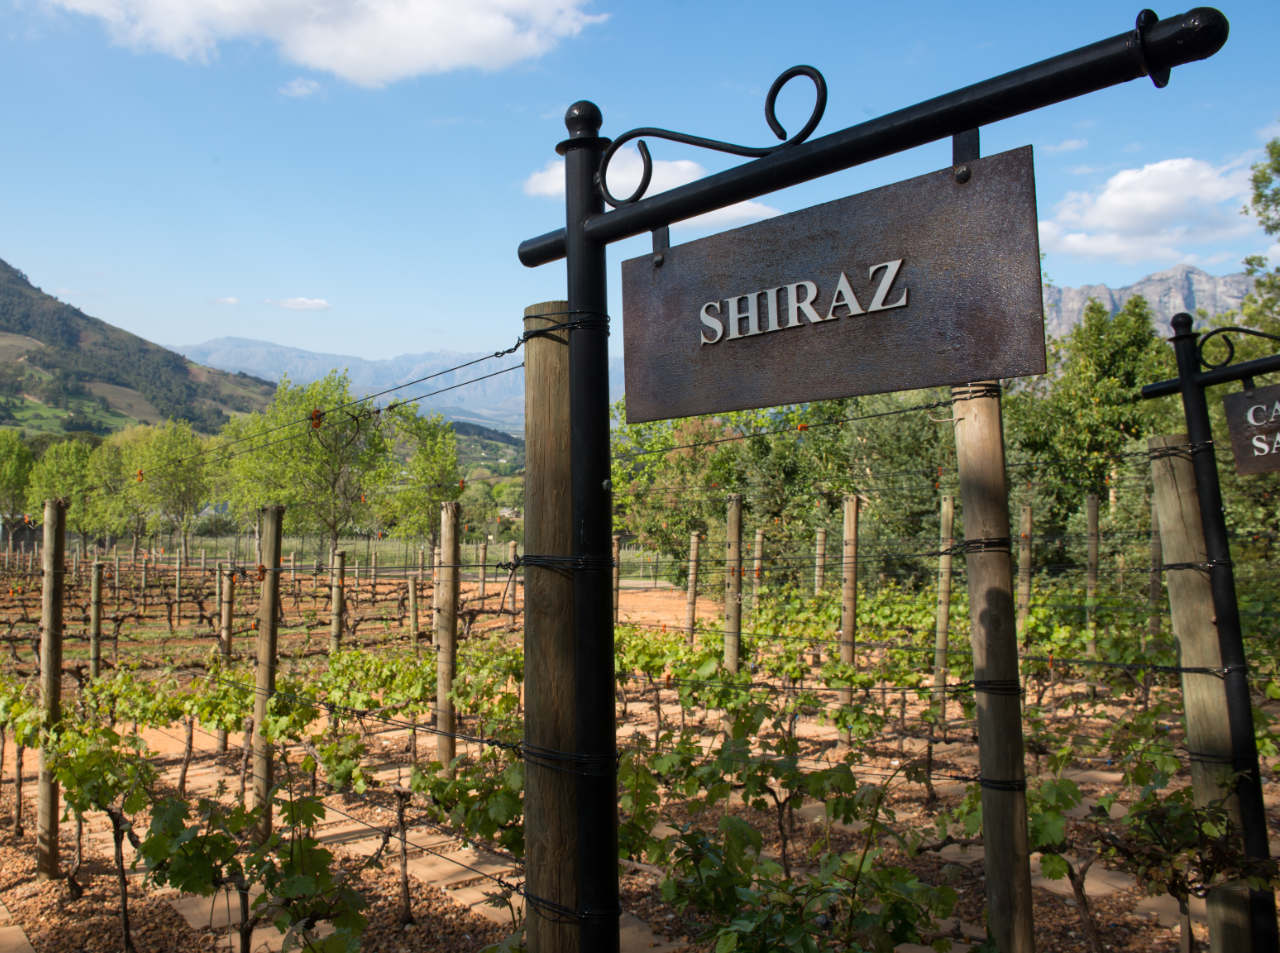 vineyard with a sign depicting the word "Shiraz"